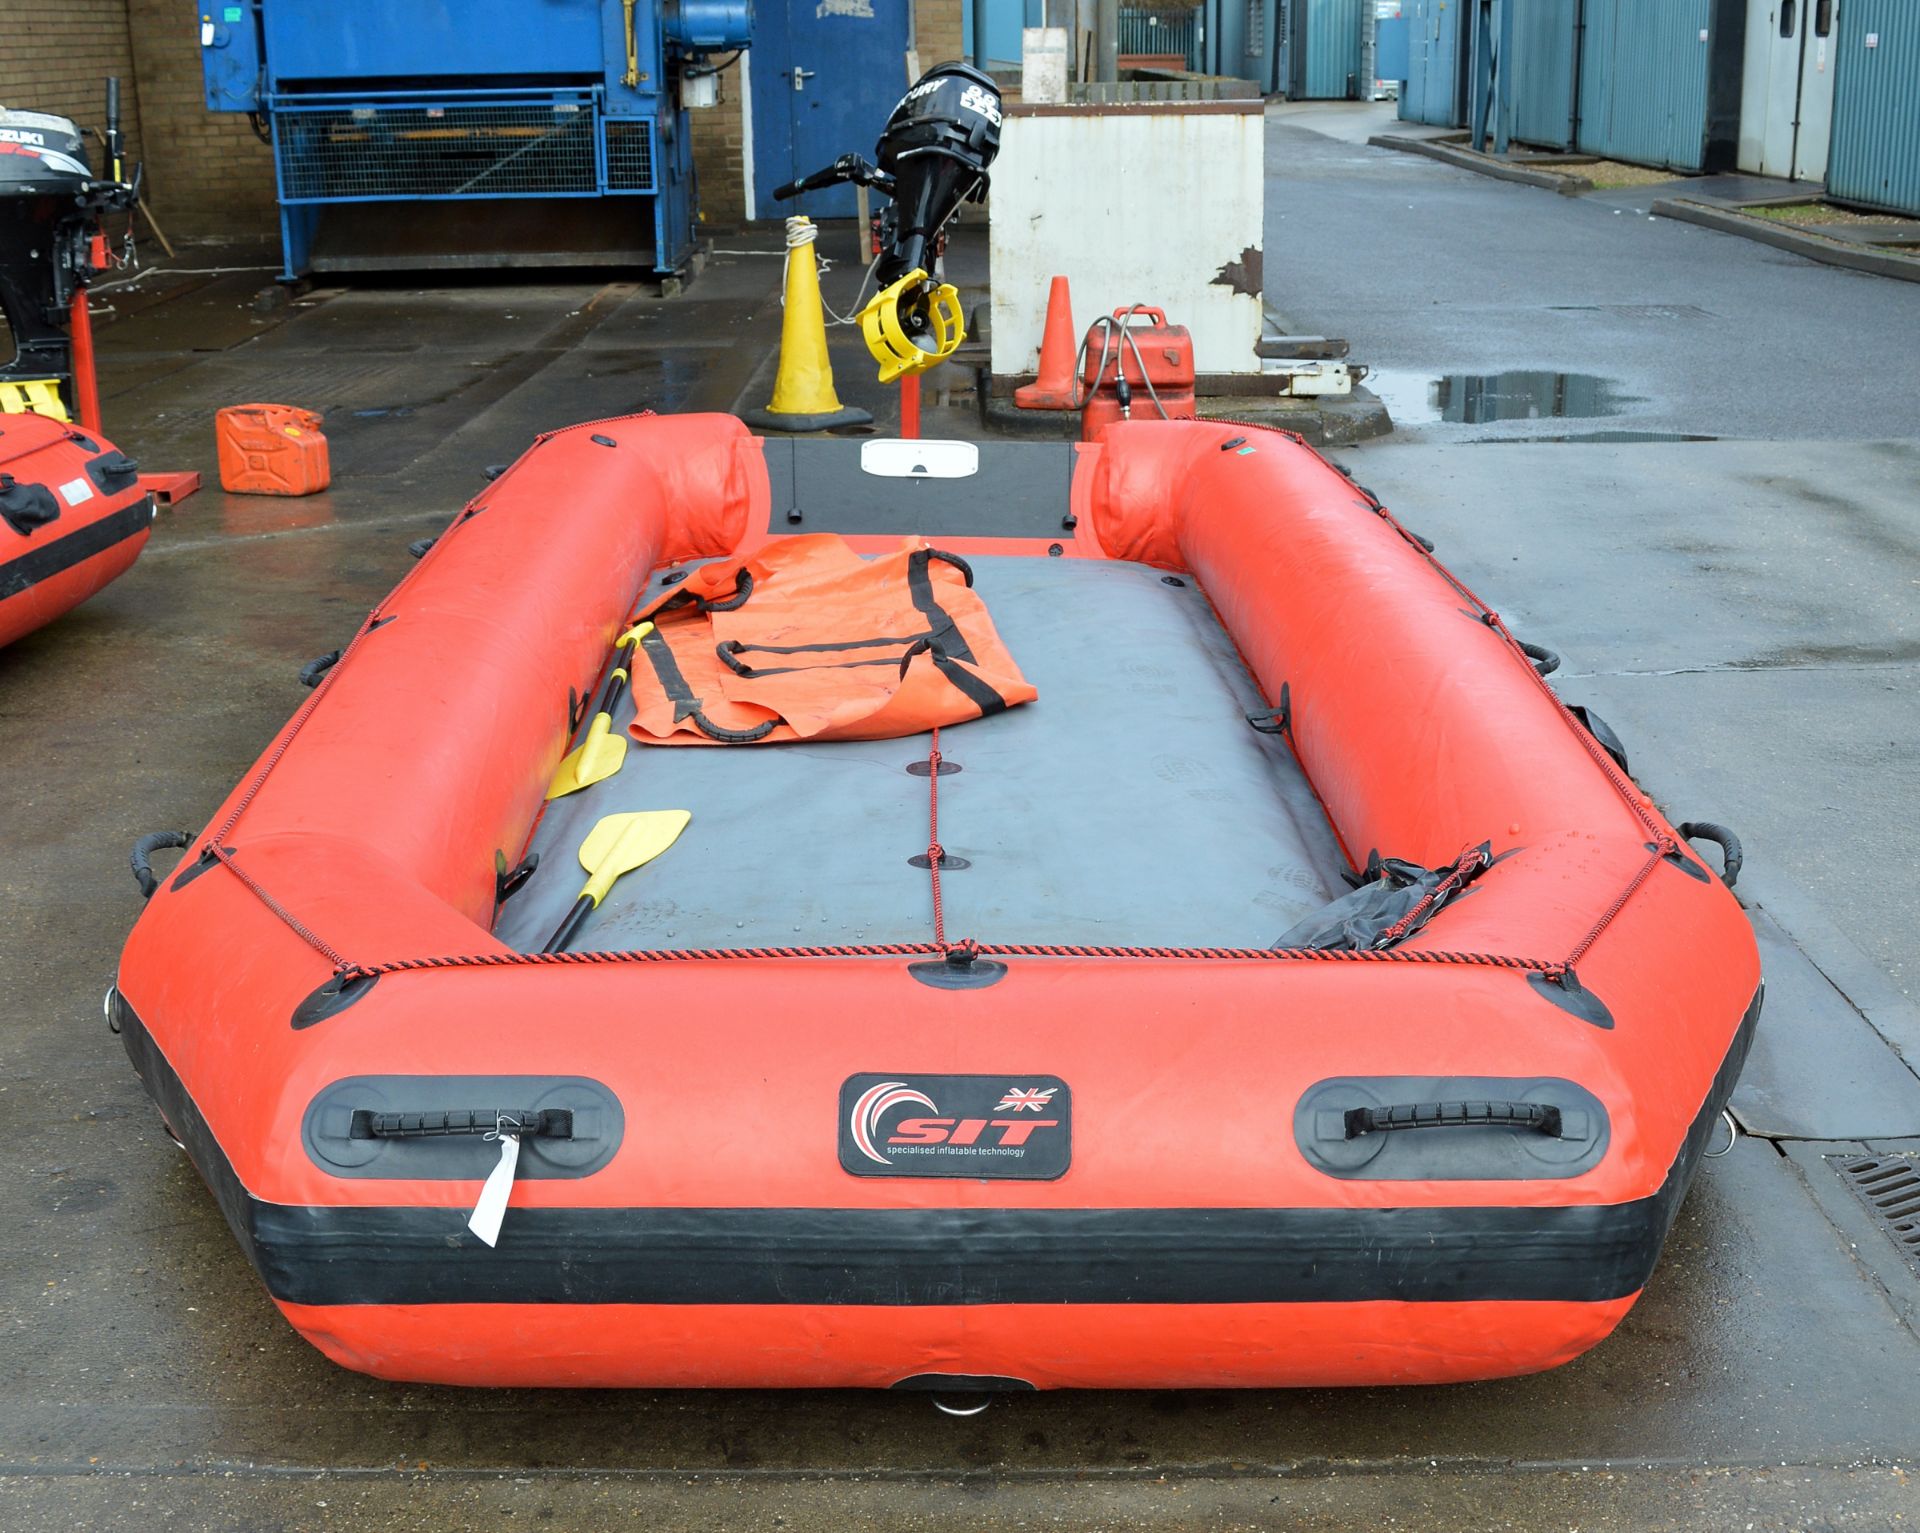 Red inflatable with Mercury 9.9 outboard engine on stand - IF10201FA serial 0R533676, fuel can